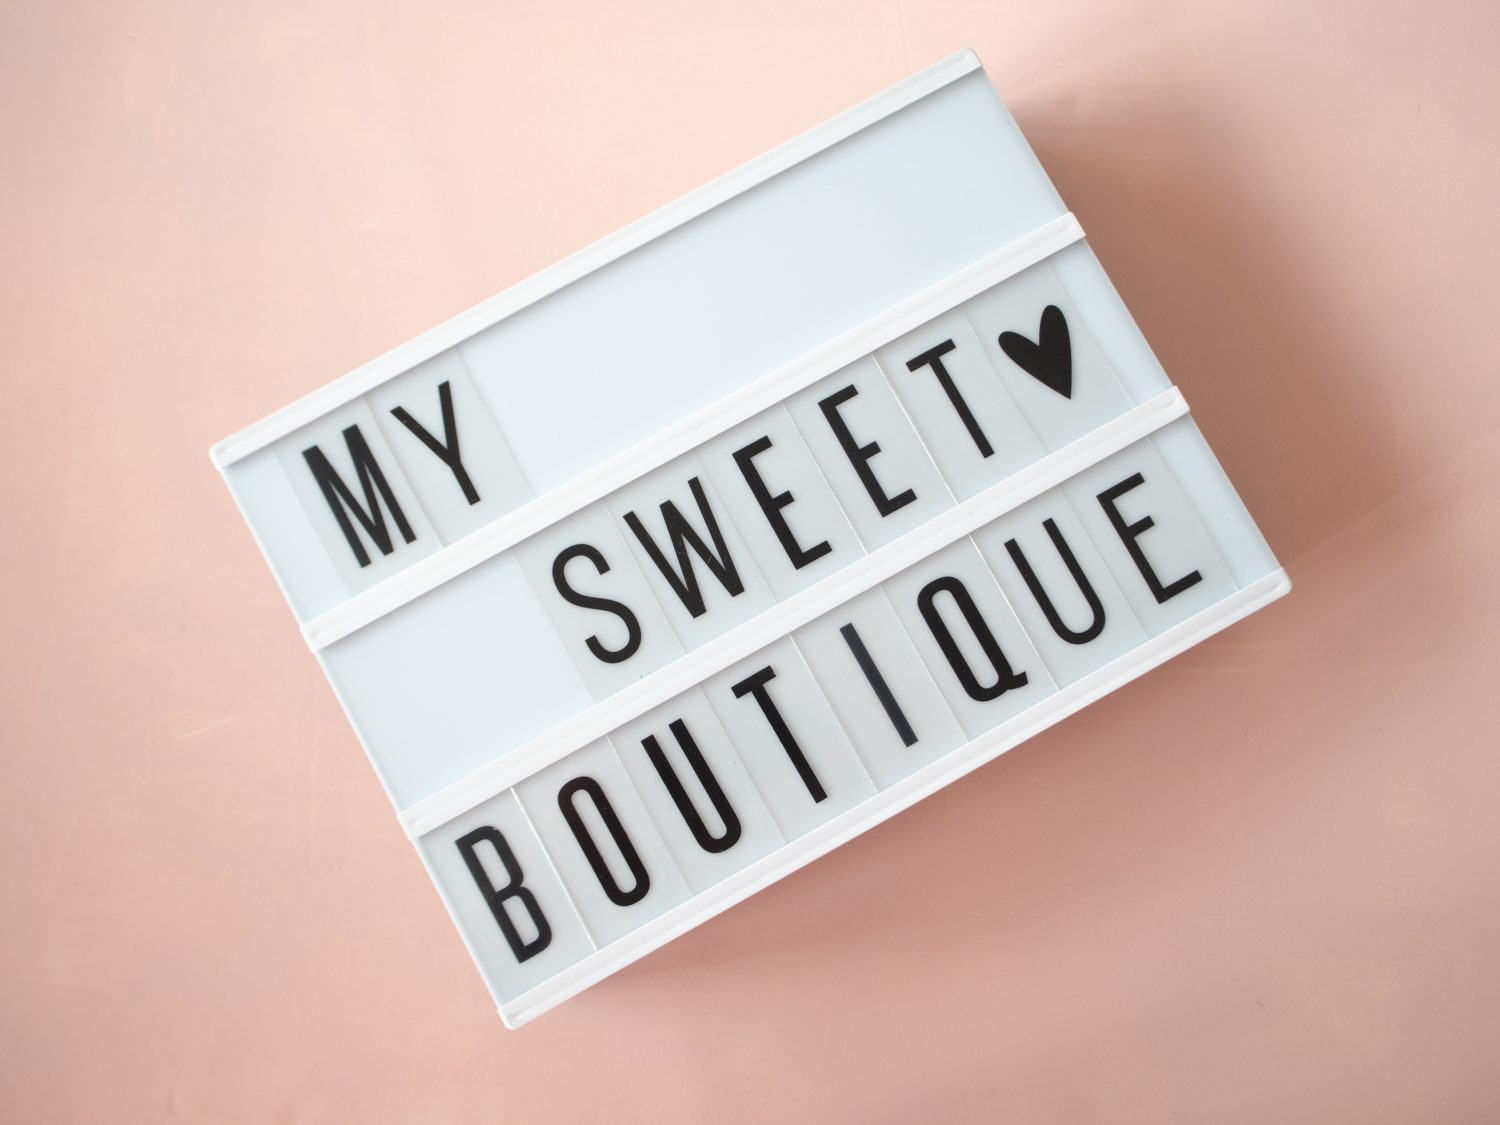 My Sweet Boutique